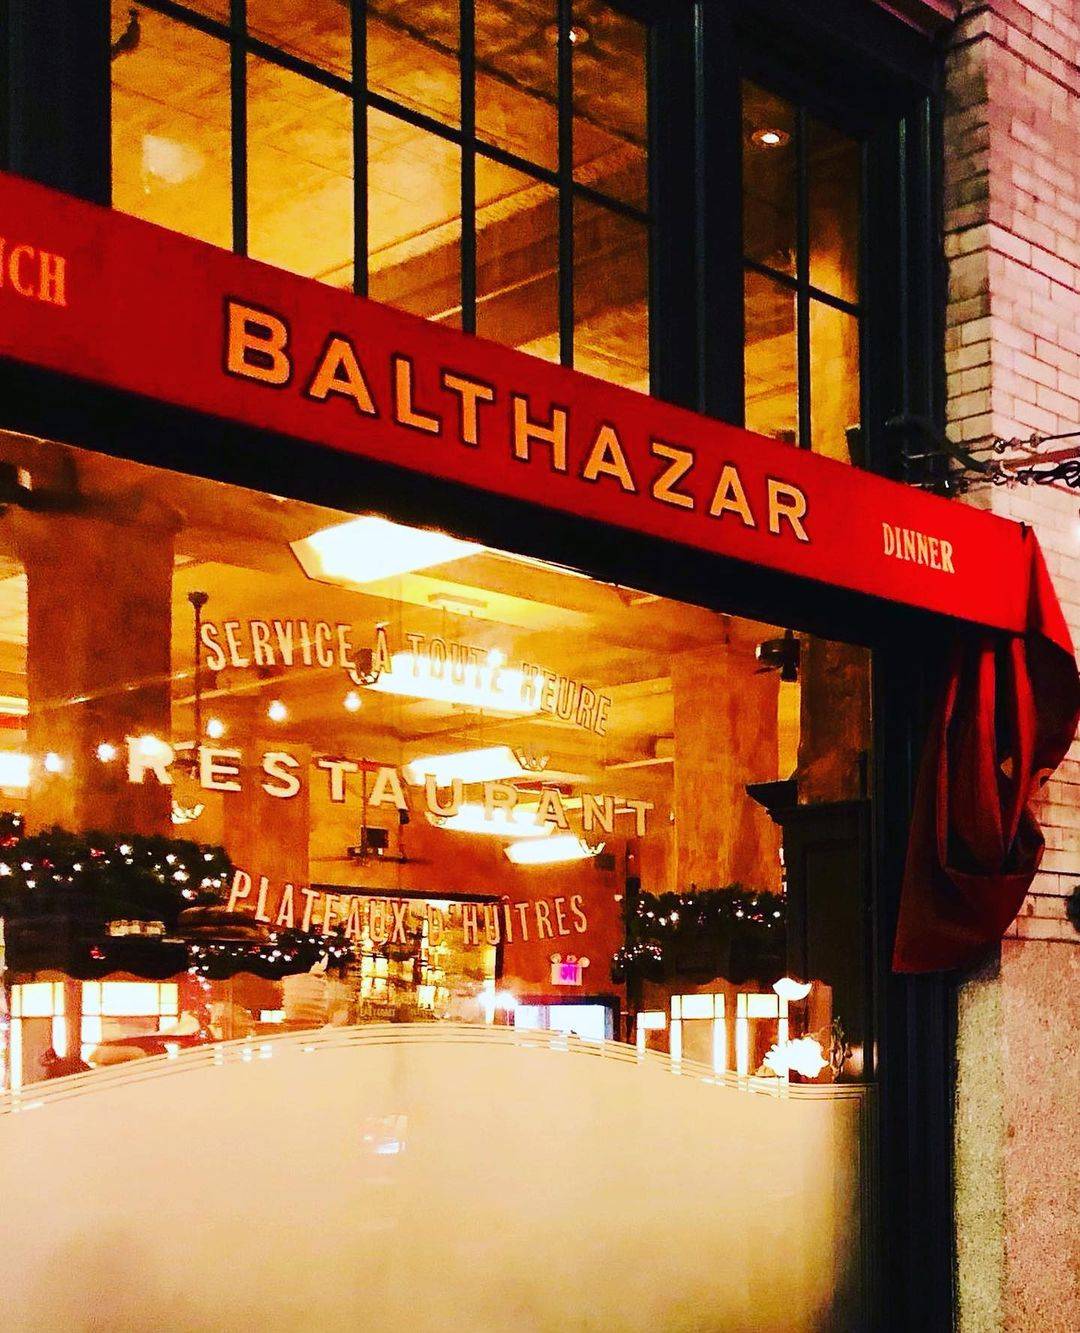 Balthazar is a French brasserie in New York City